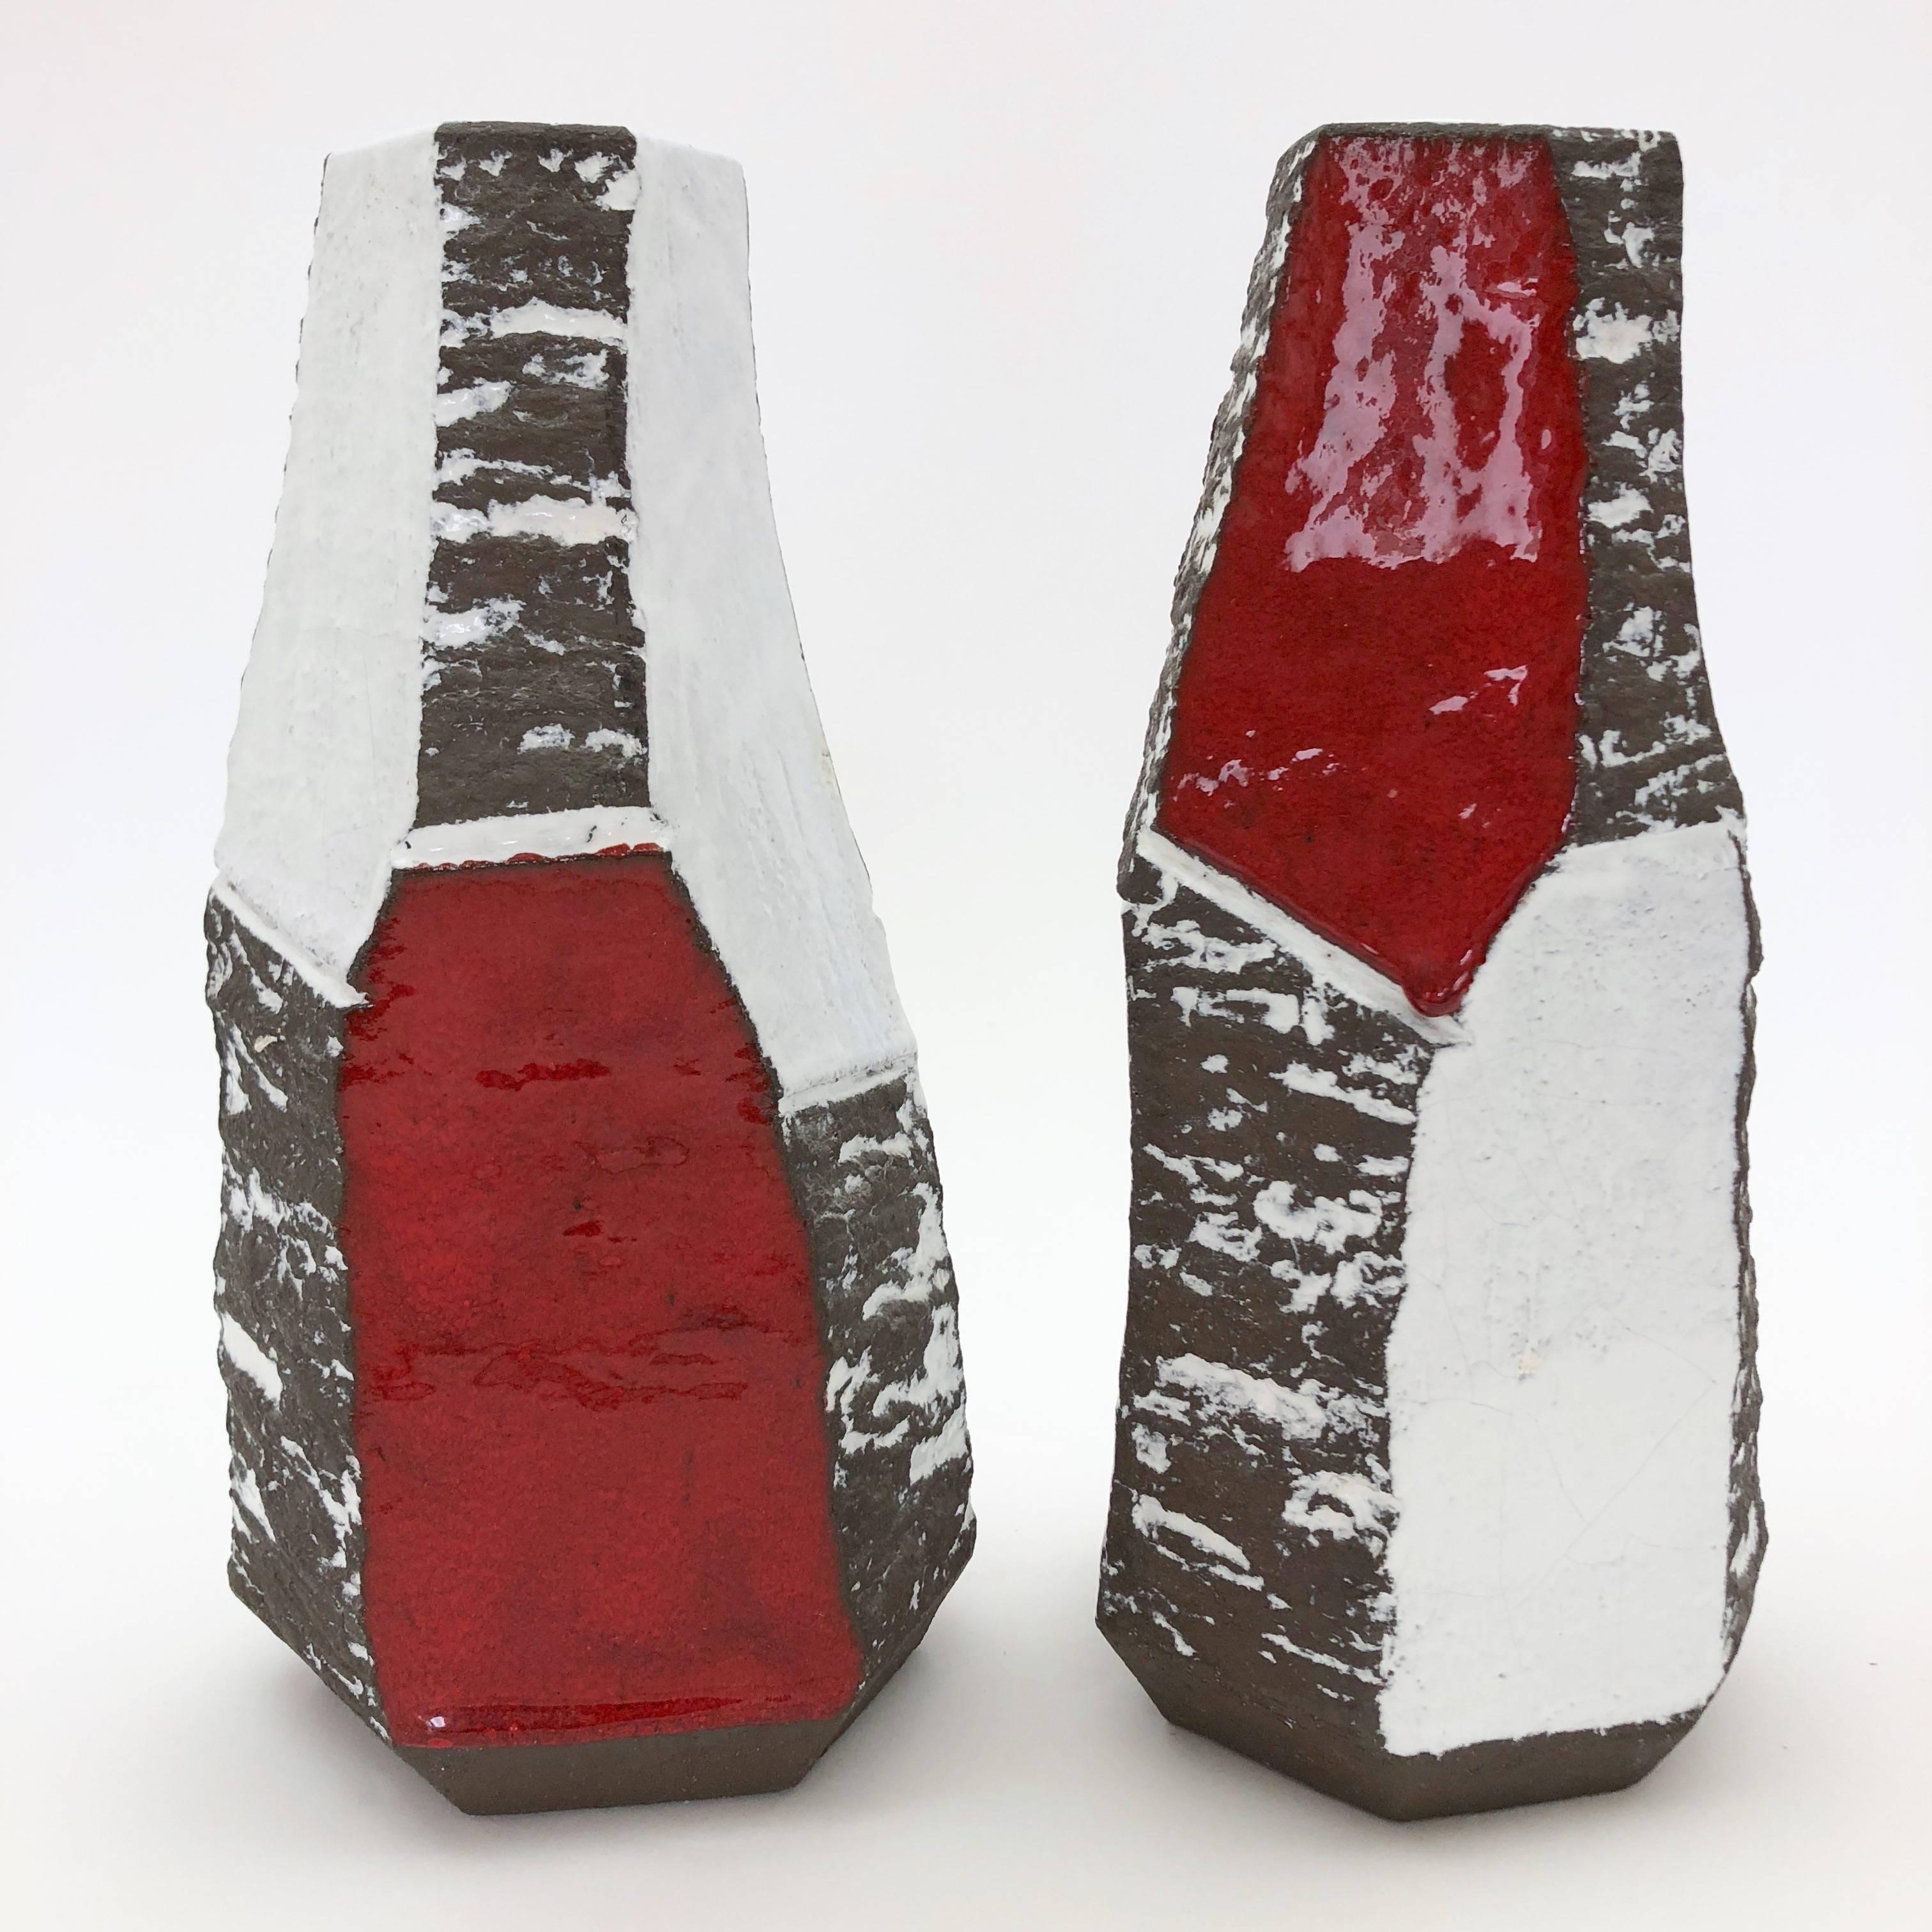 Pair of sculptural lamp bases, geometric shapes, stoneware glazed in glossy white, red, and matte dark brown. 

One-of-a-kind hand-sculpted pieces, signed back with the artist's stamp.

* Height dimension is for the pottery sculpture only, and